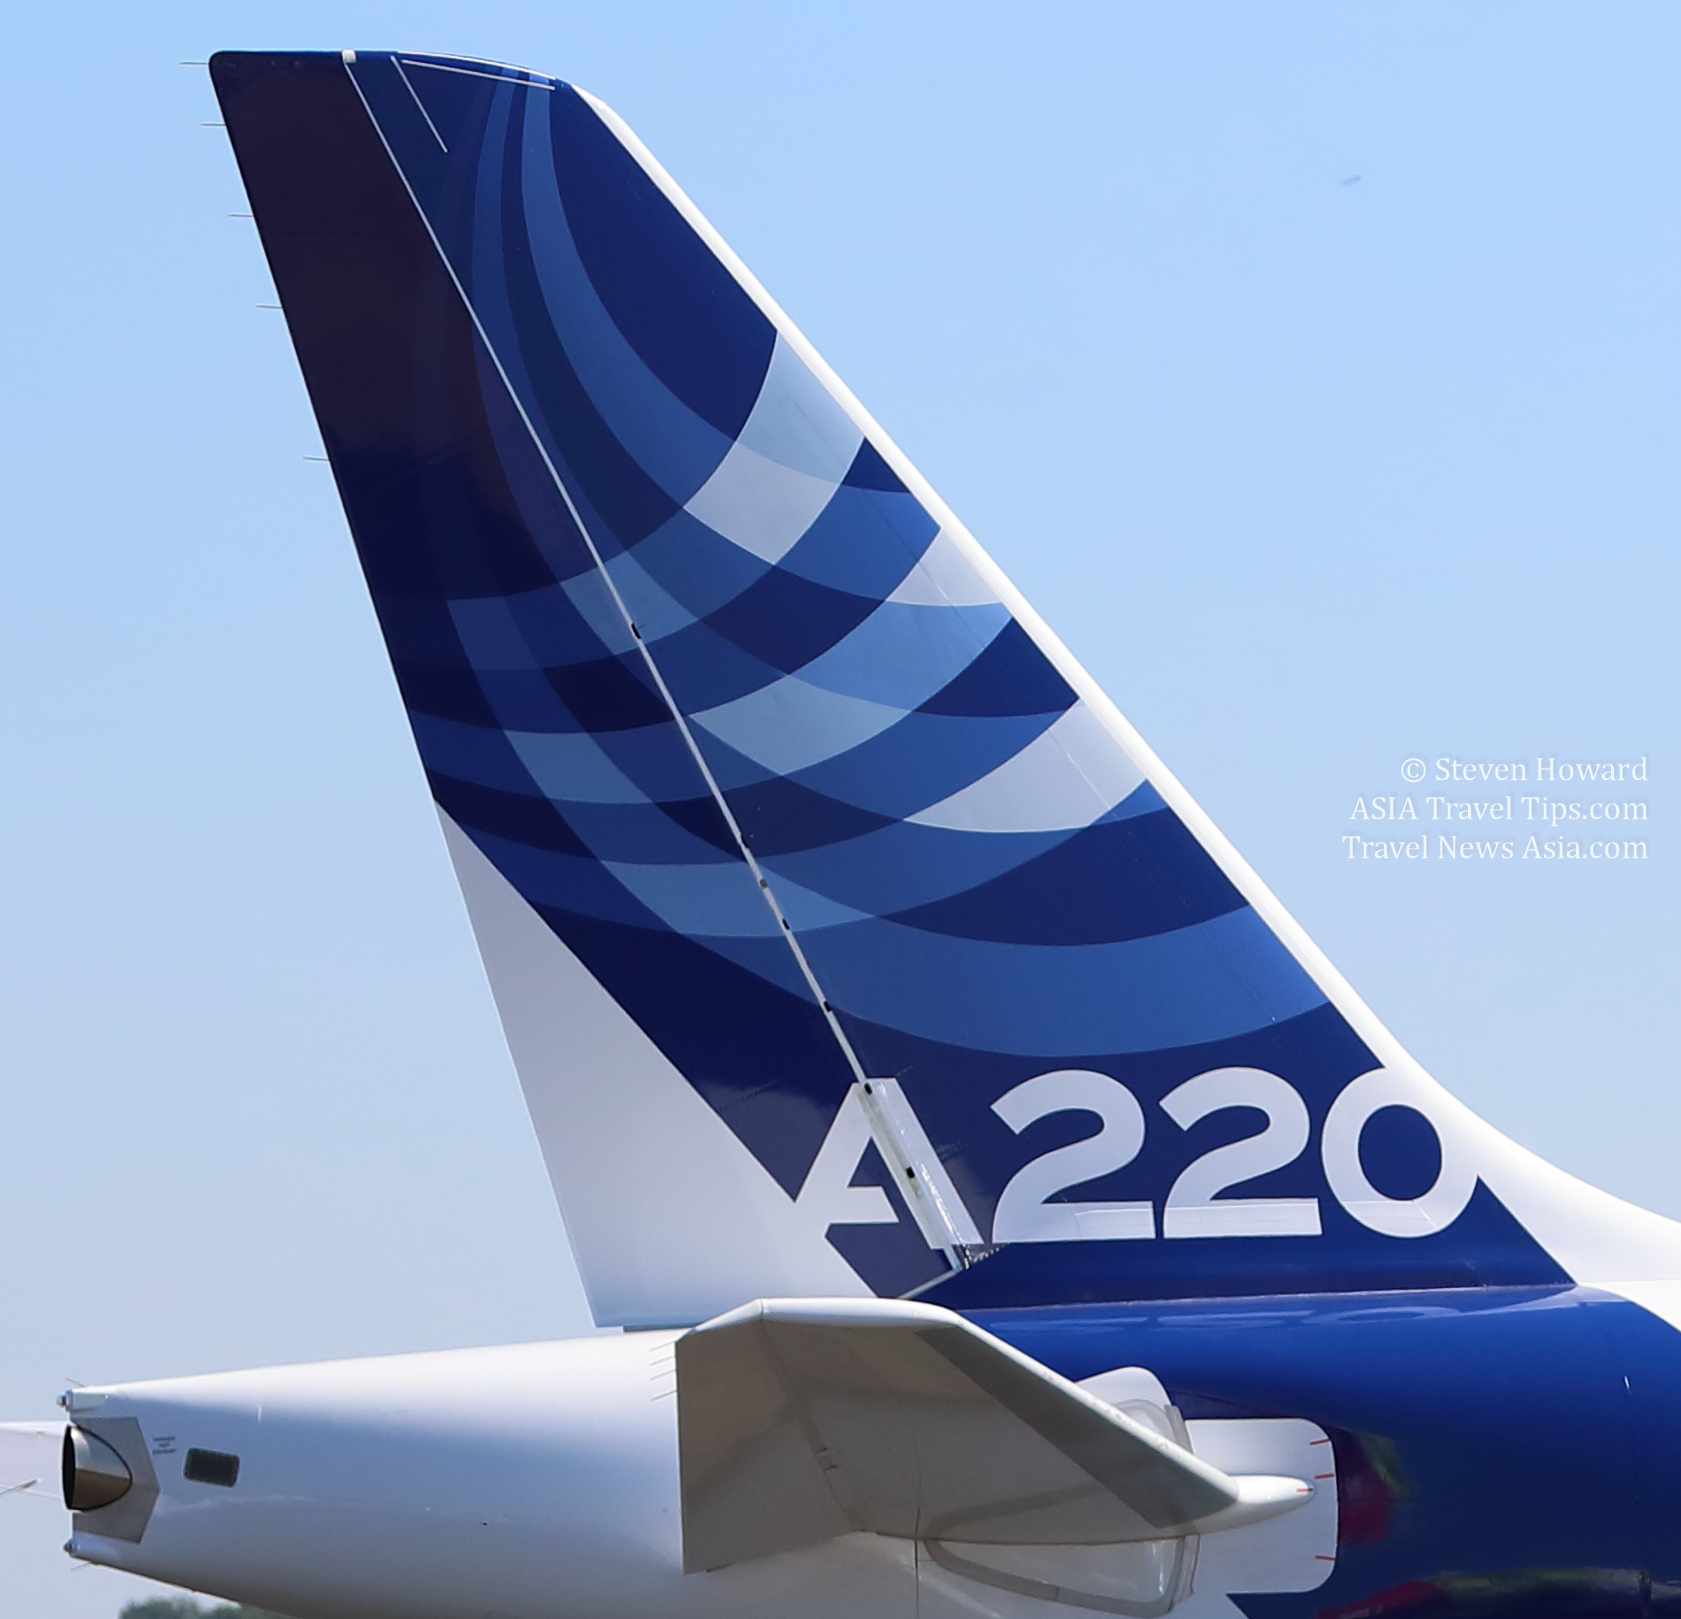 Tail fin of an Airbus A220. Picture by Steven Howard of TravelNewsAsia.com Click to enlarge.